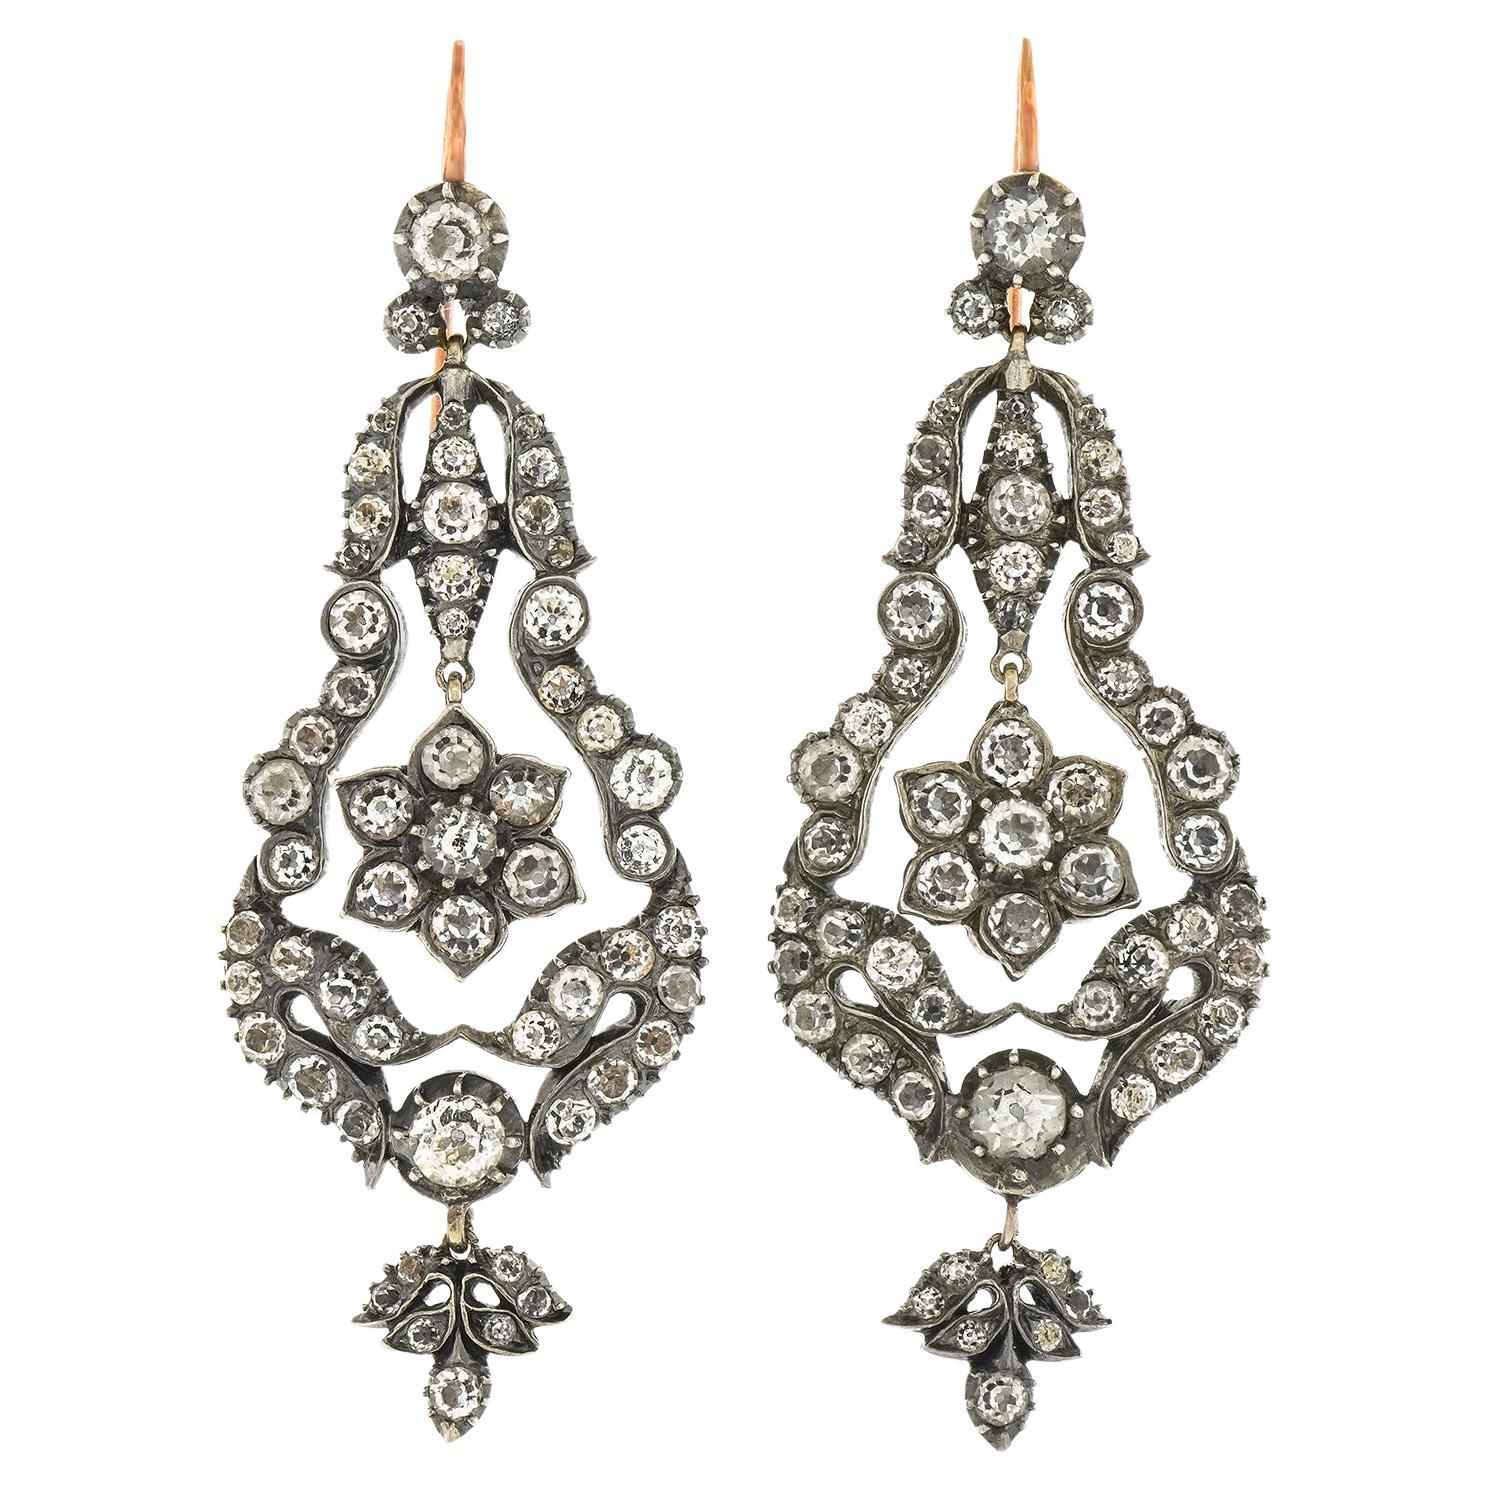 Early Victorian Paste Earrings in Silver over Gold, circa 1840s